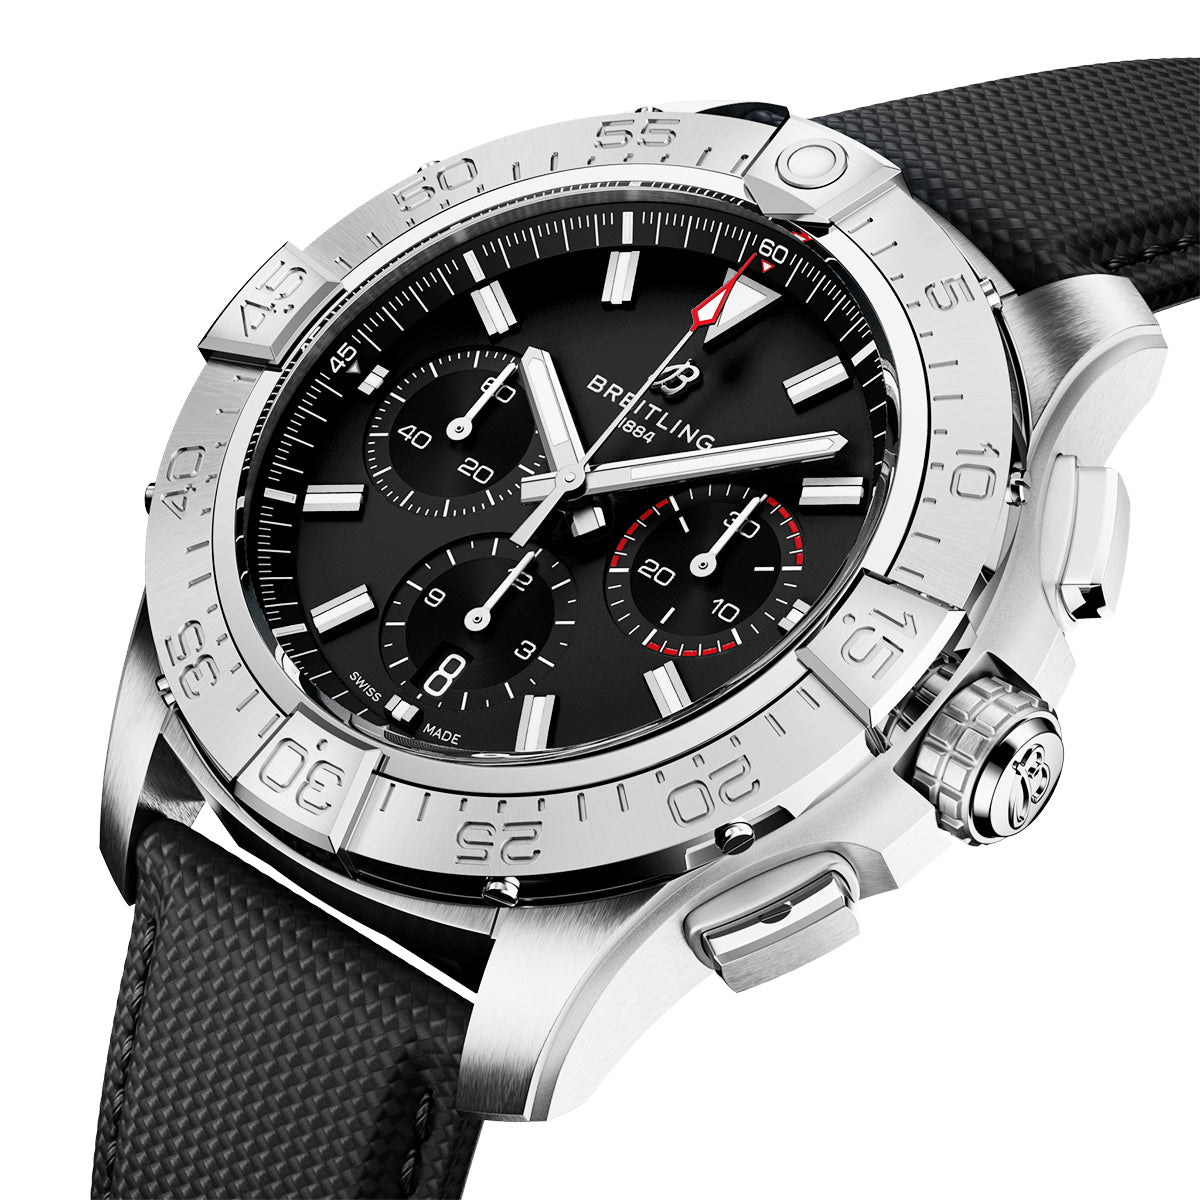 Avenger 44mm Black Dial Automatic Chronograph Strap Watch